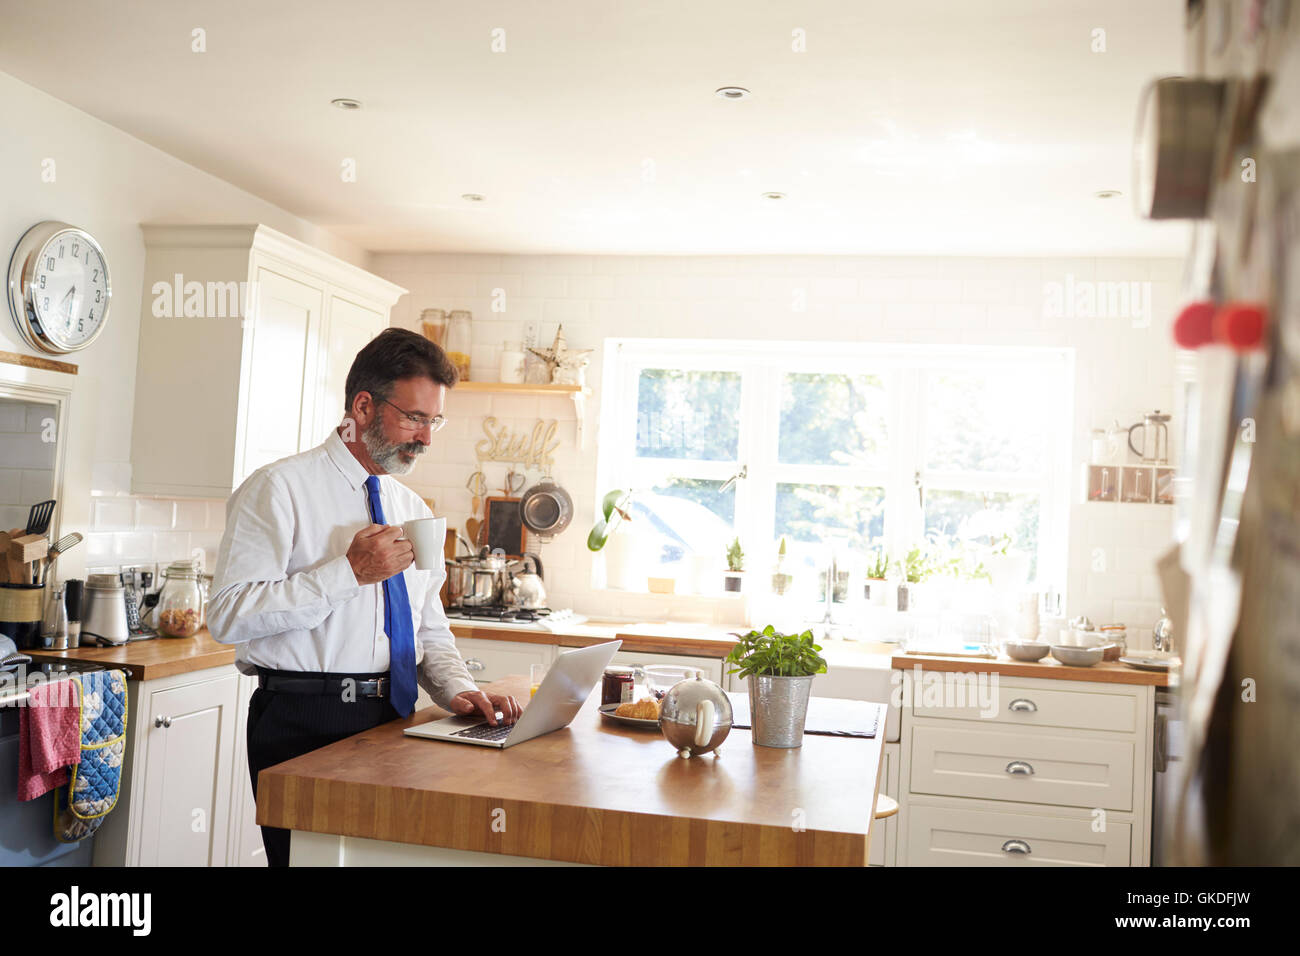 Man in a tie stands holding cup, using laptop in kitchen Stock Photo